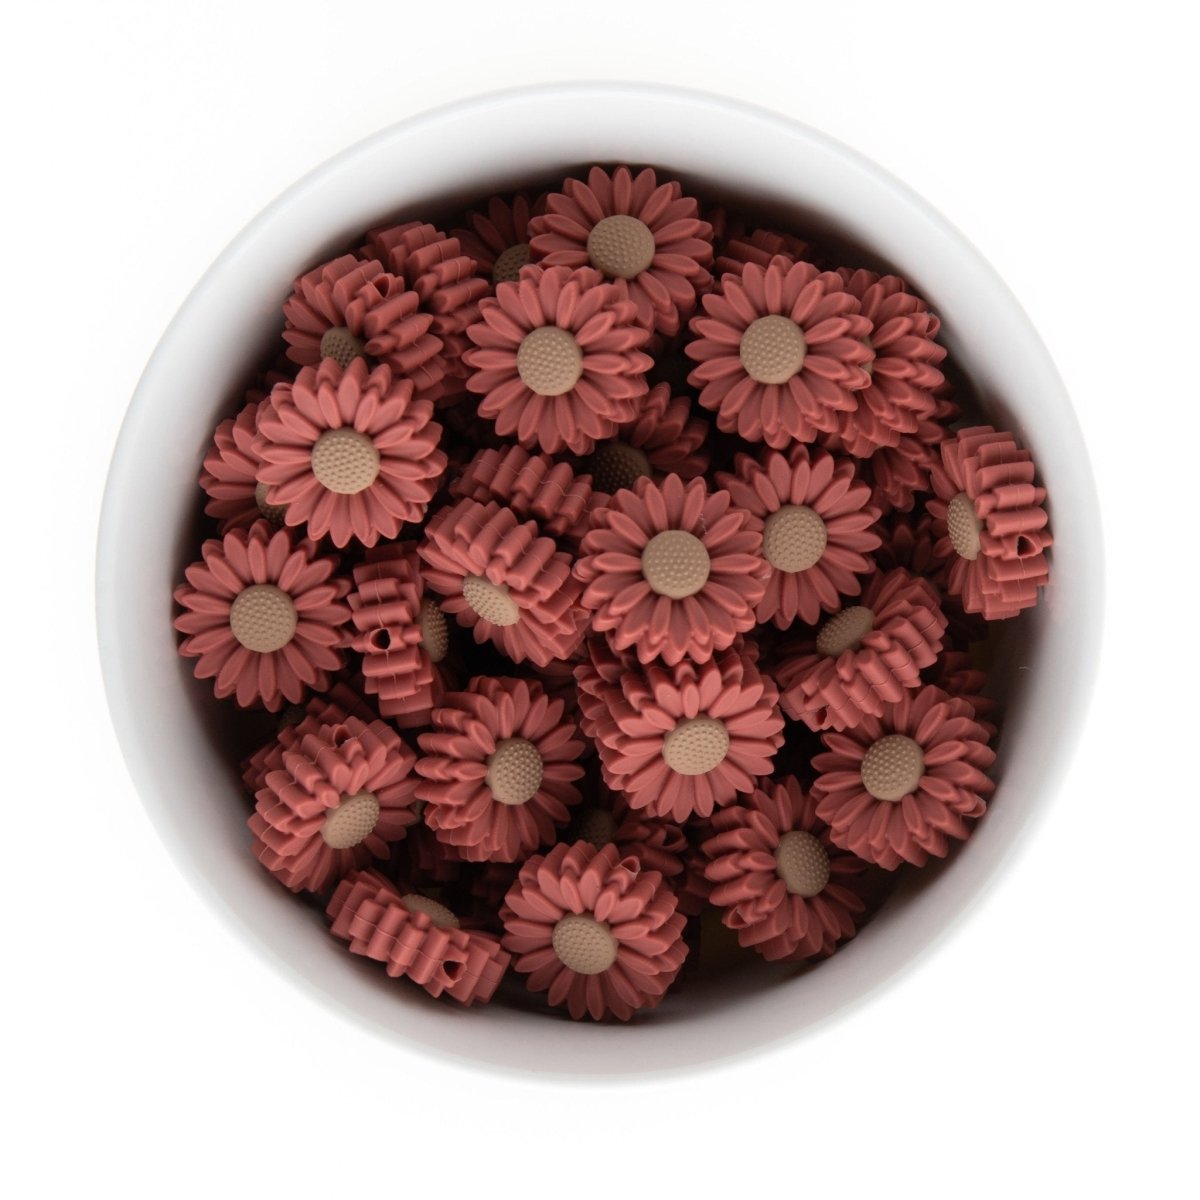 Silicone Focal Beads Daisies Burgundy Rose from Cara & Co Craft Supply